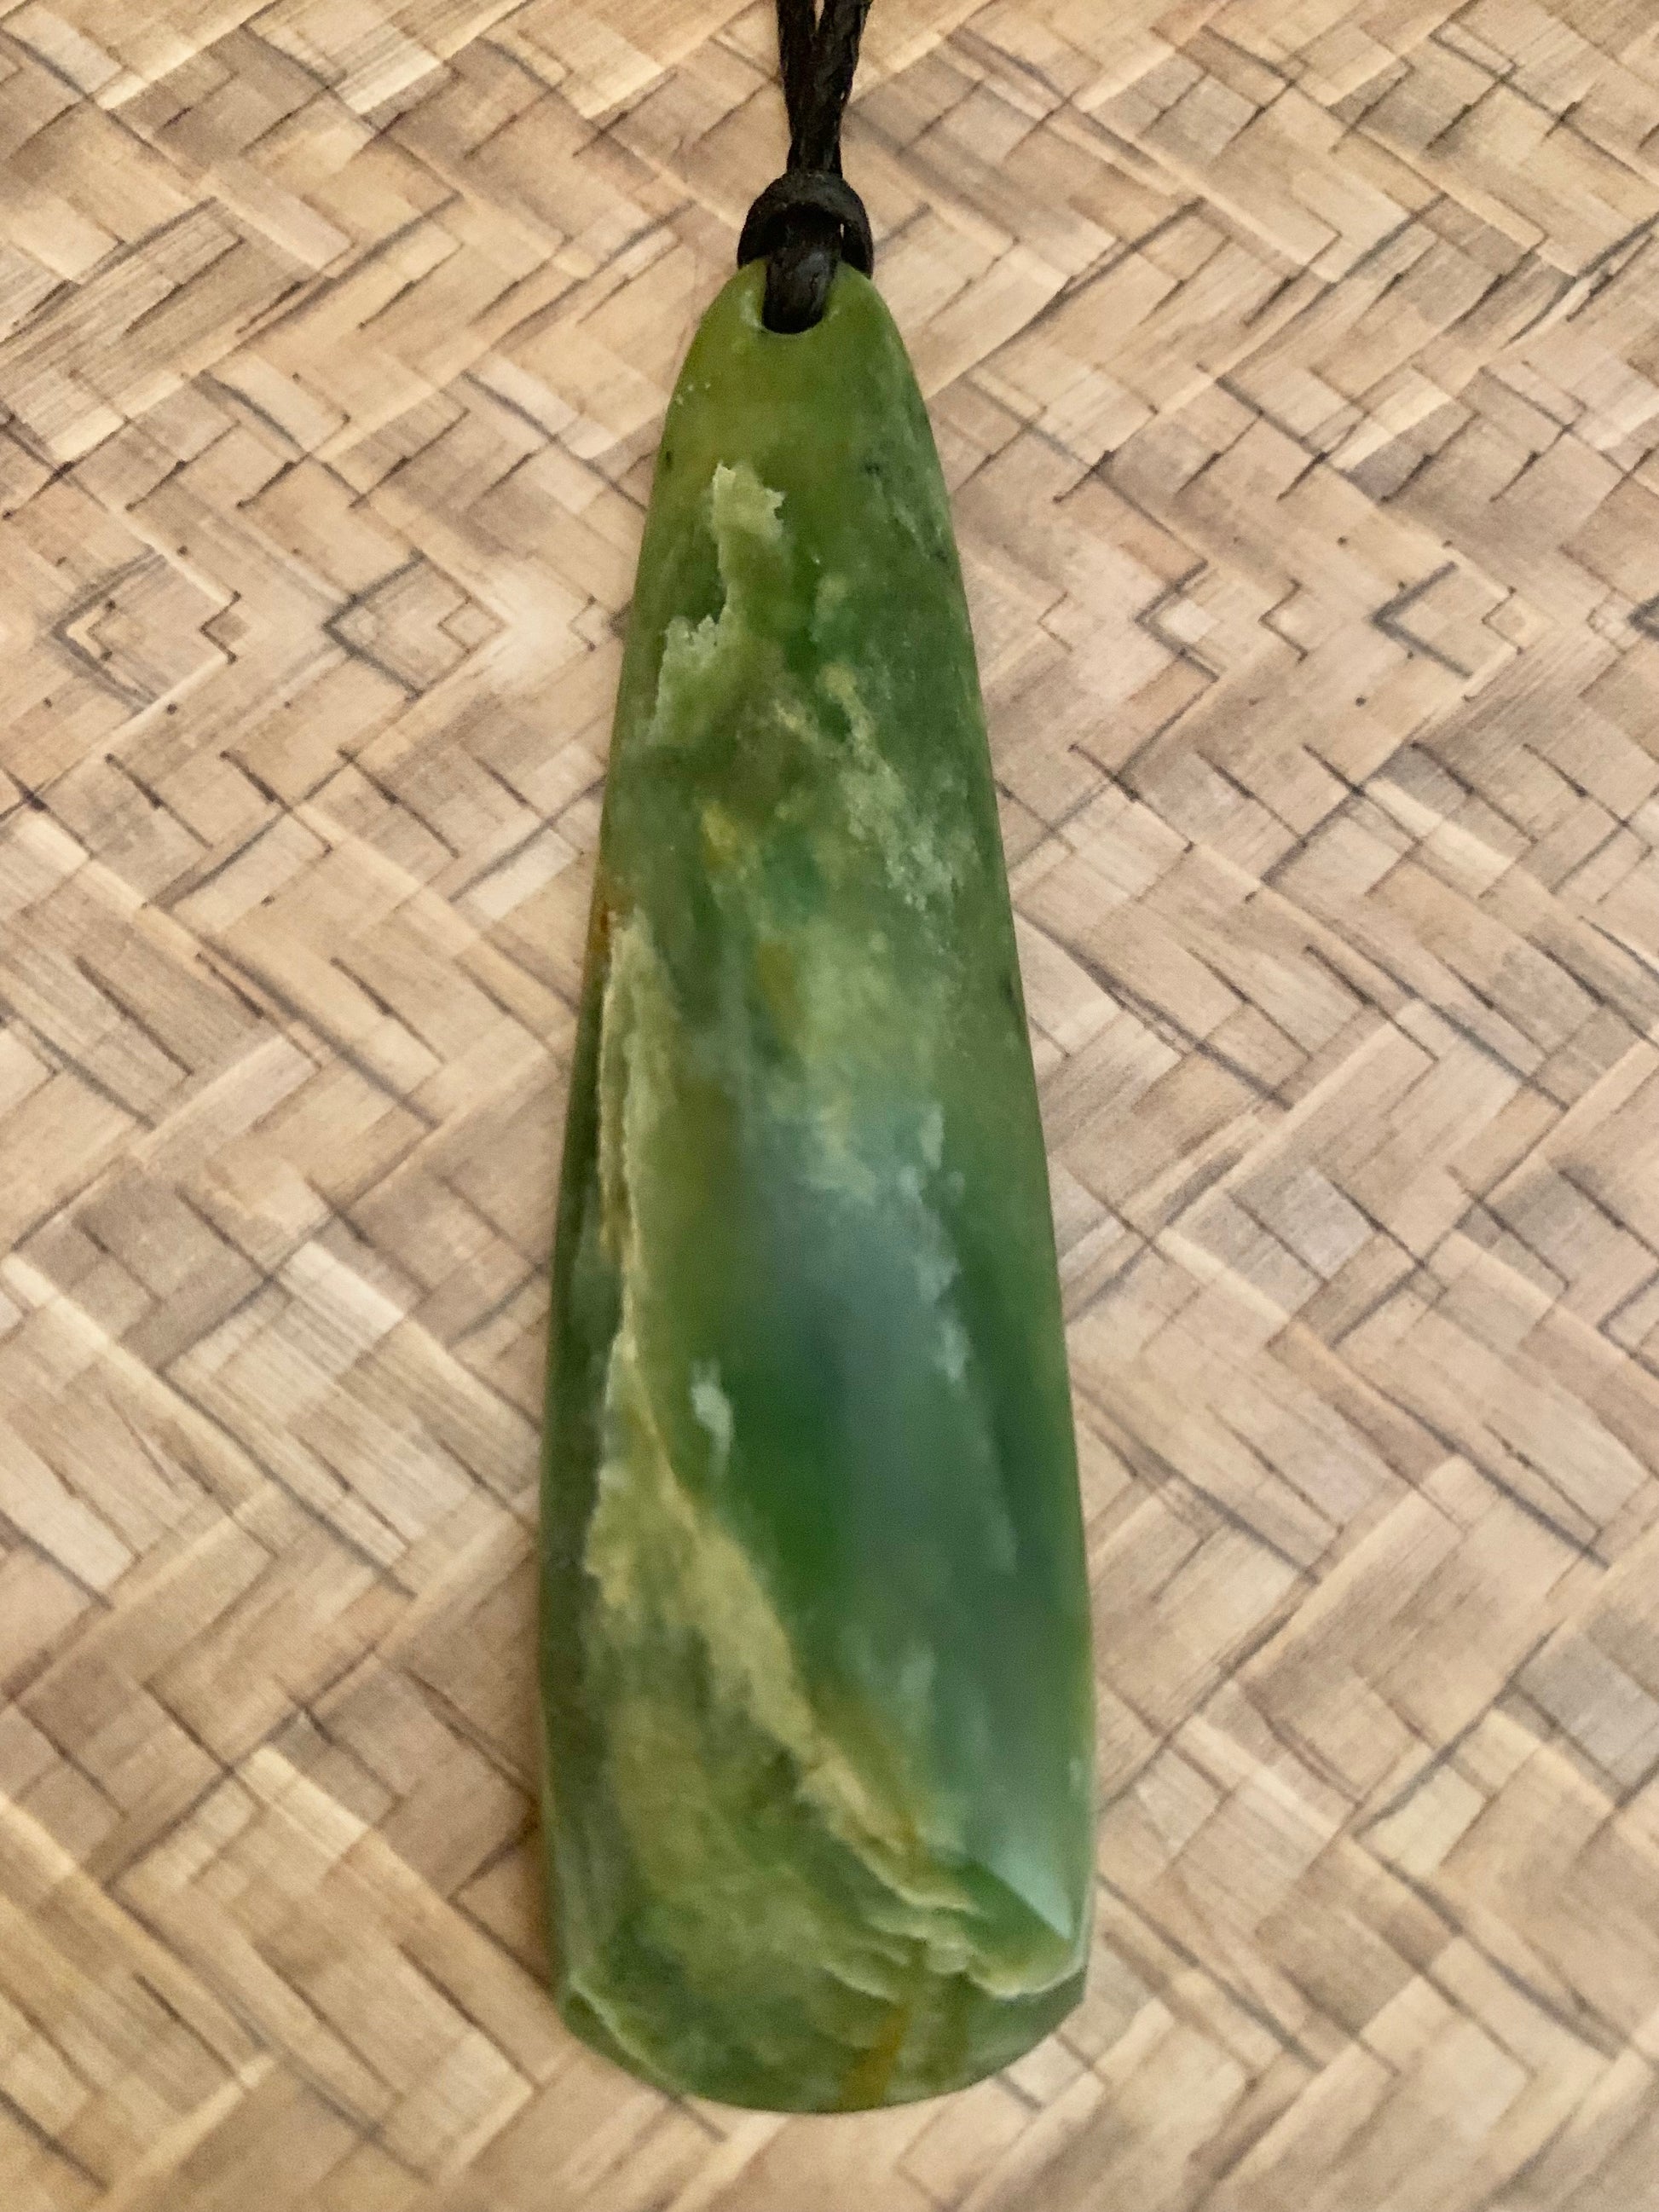 Pounamu drop pendant from New Zealand available from Silver Fern Gallery